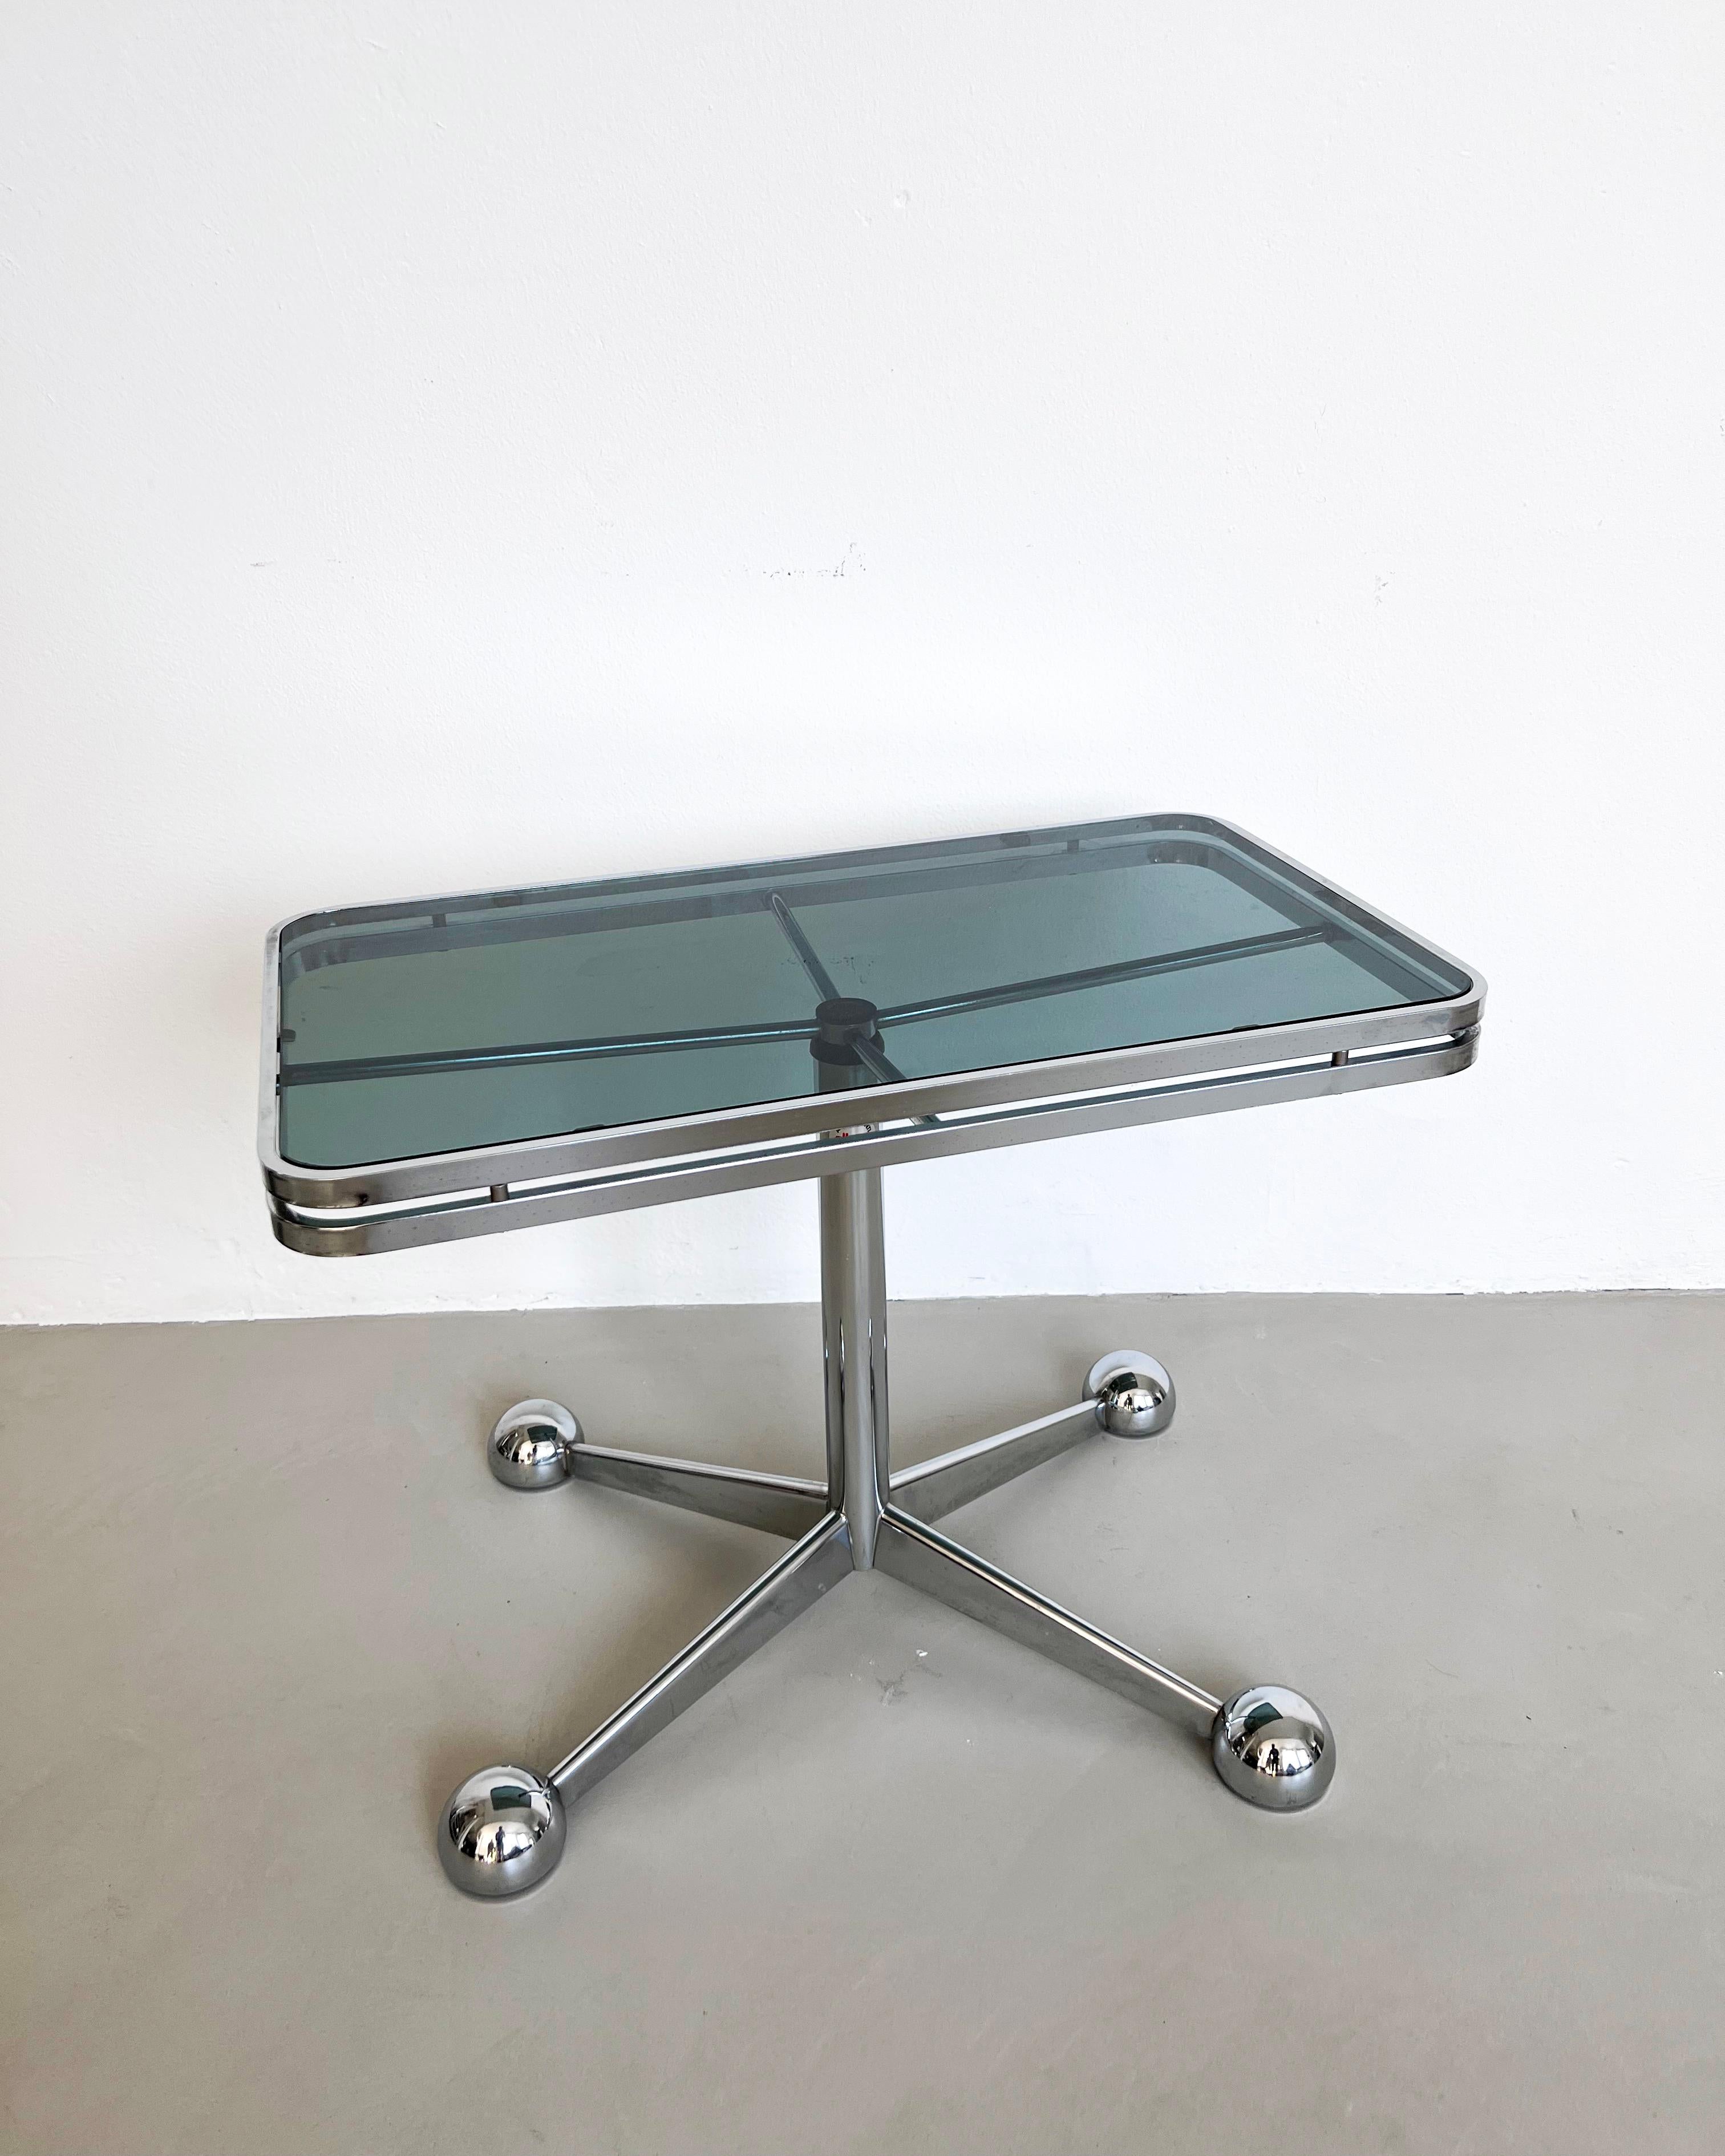 Late 20th Century Italian Space Age Coffee / Dining Table, Smoked Glass, Chromed Metal, Telescopic